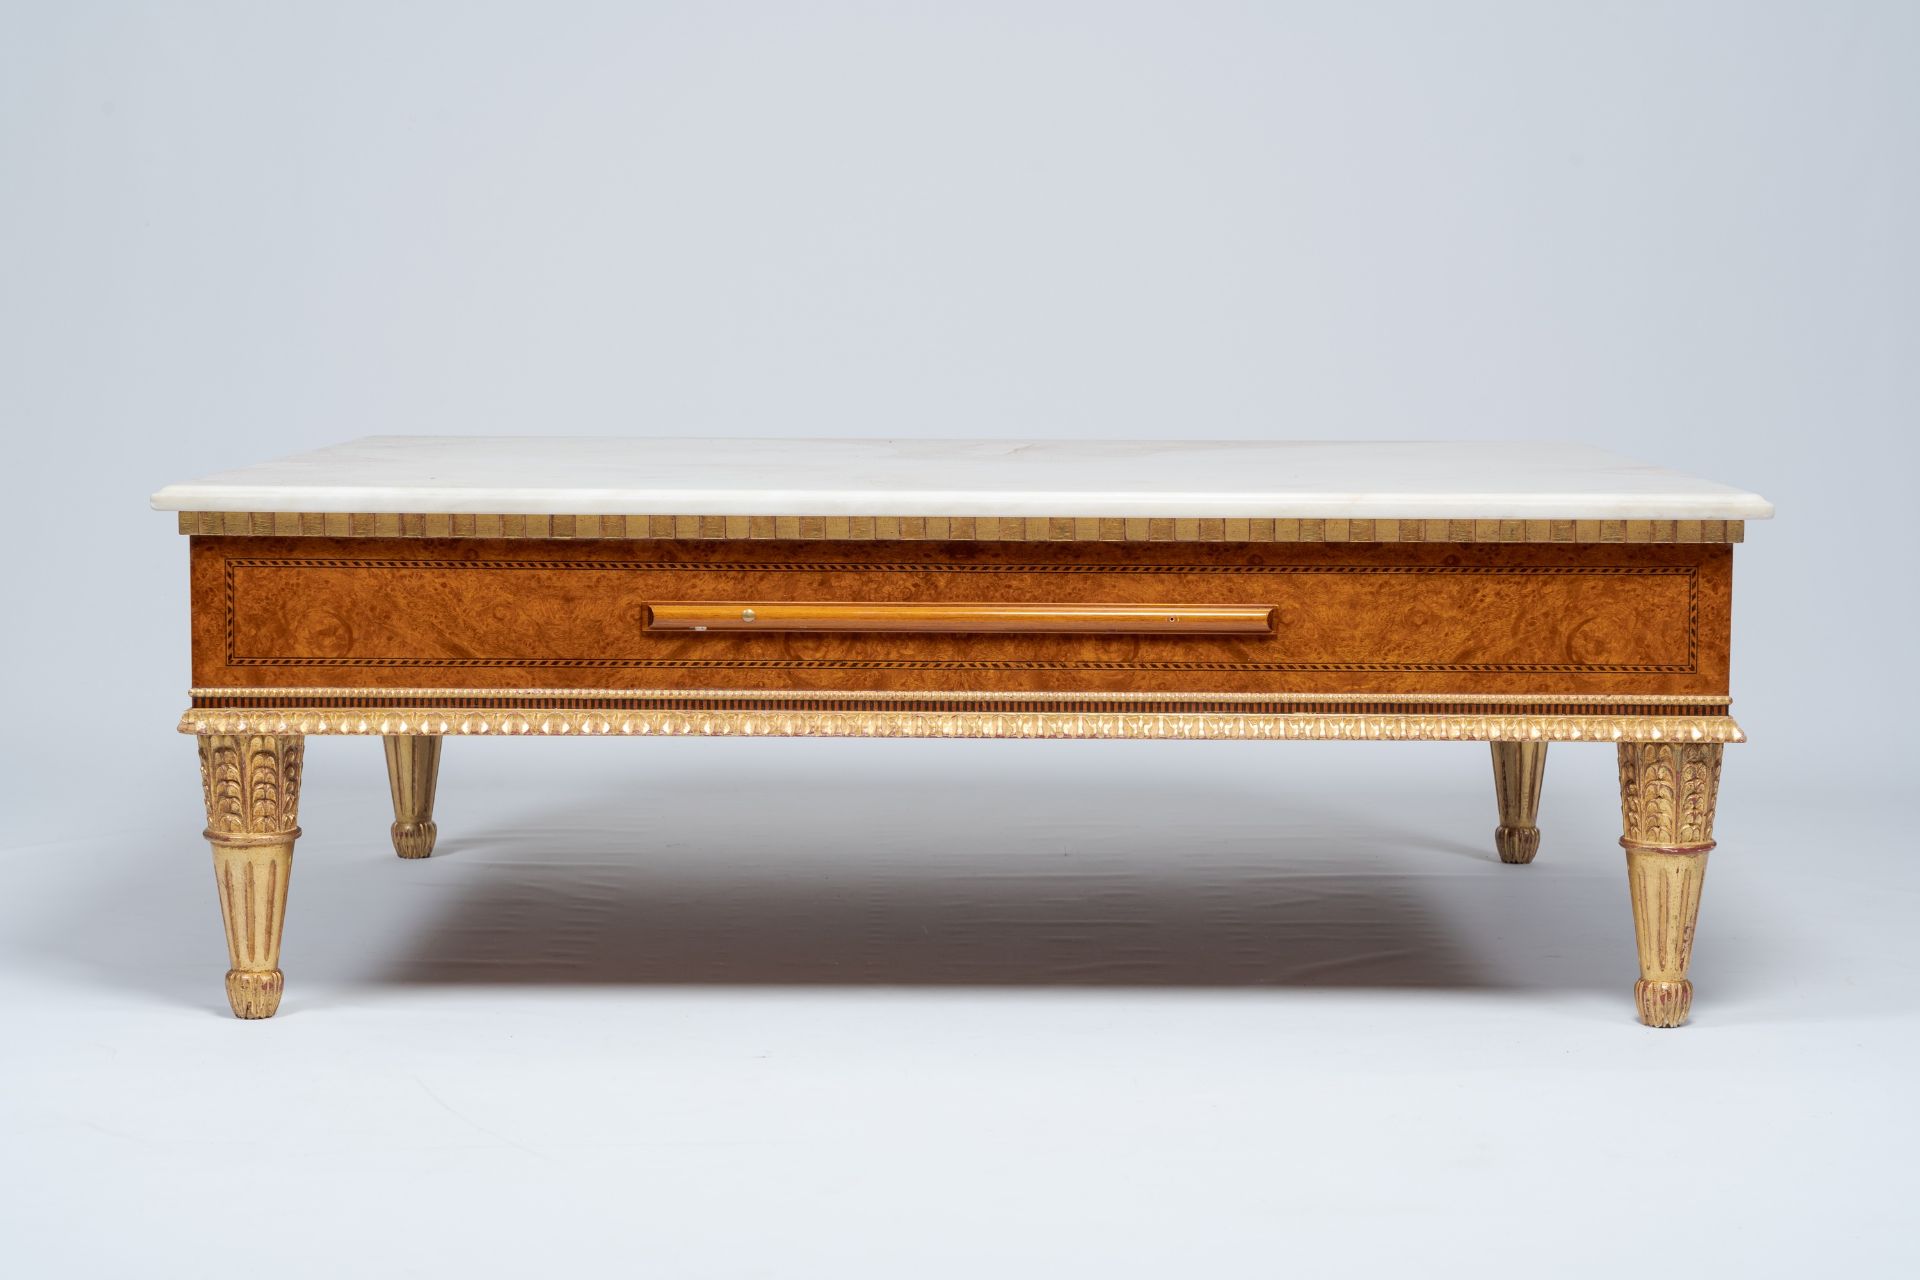 A Neoclassical partly gilt wood coffee table with marble top and four extendable plateaus, 20th C. - Image 5 of 8